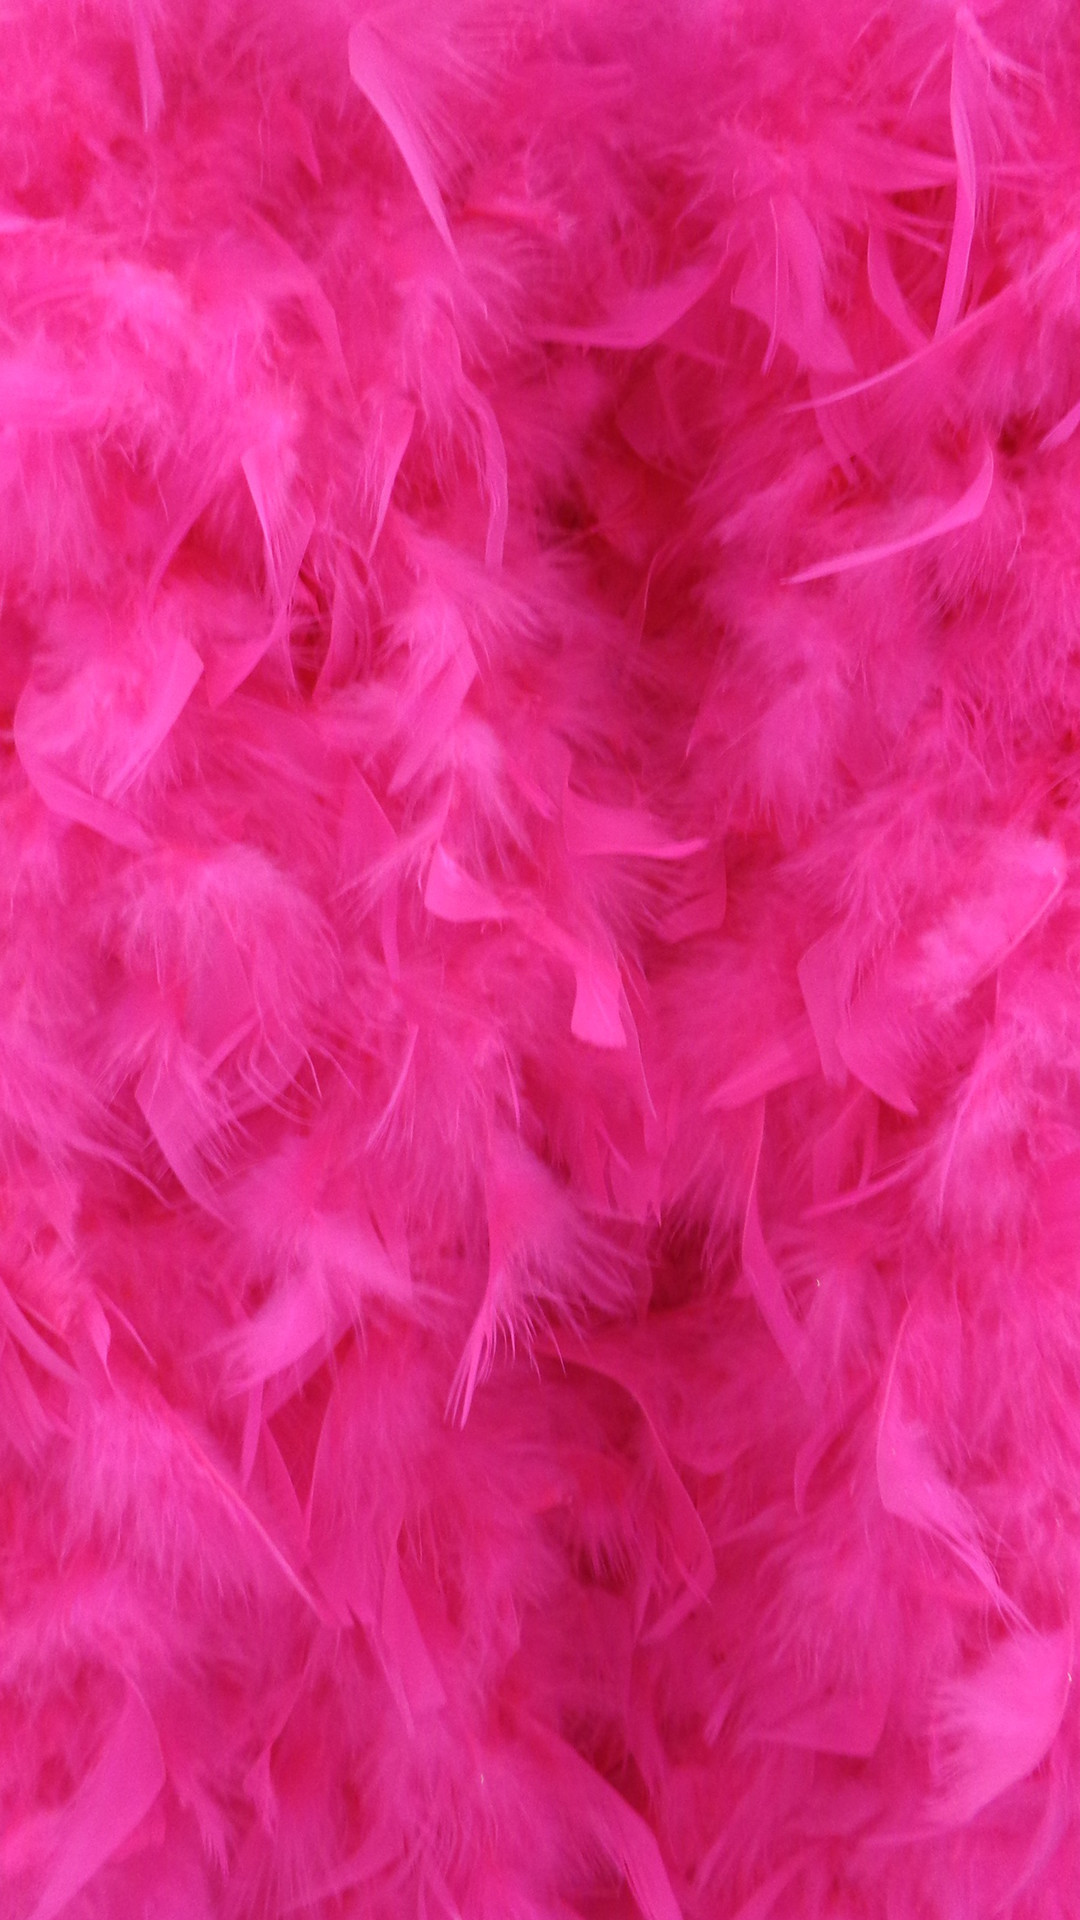 pink wallpaper,pink,feather boa,red,magenta,fur